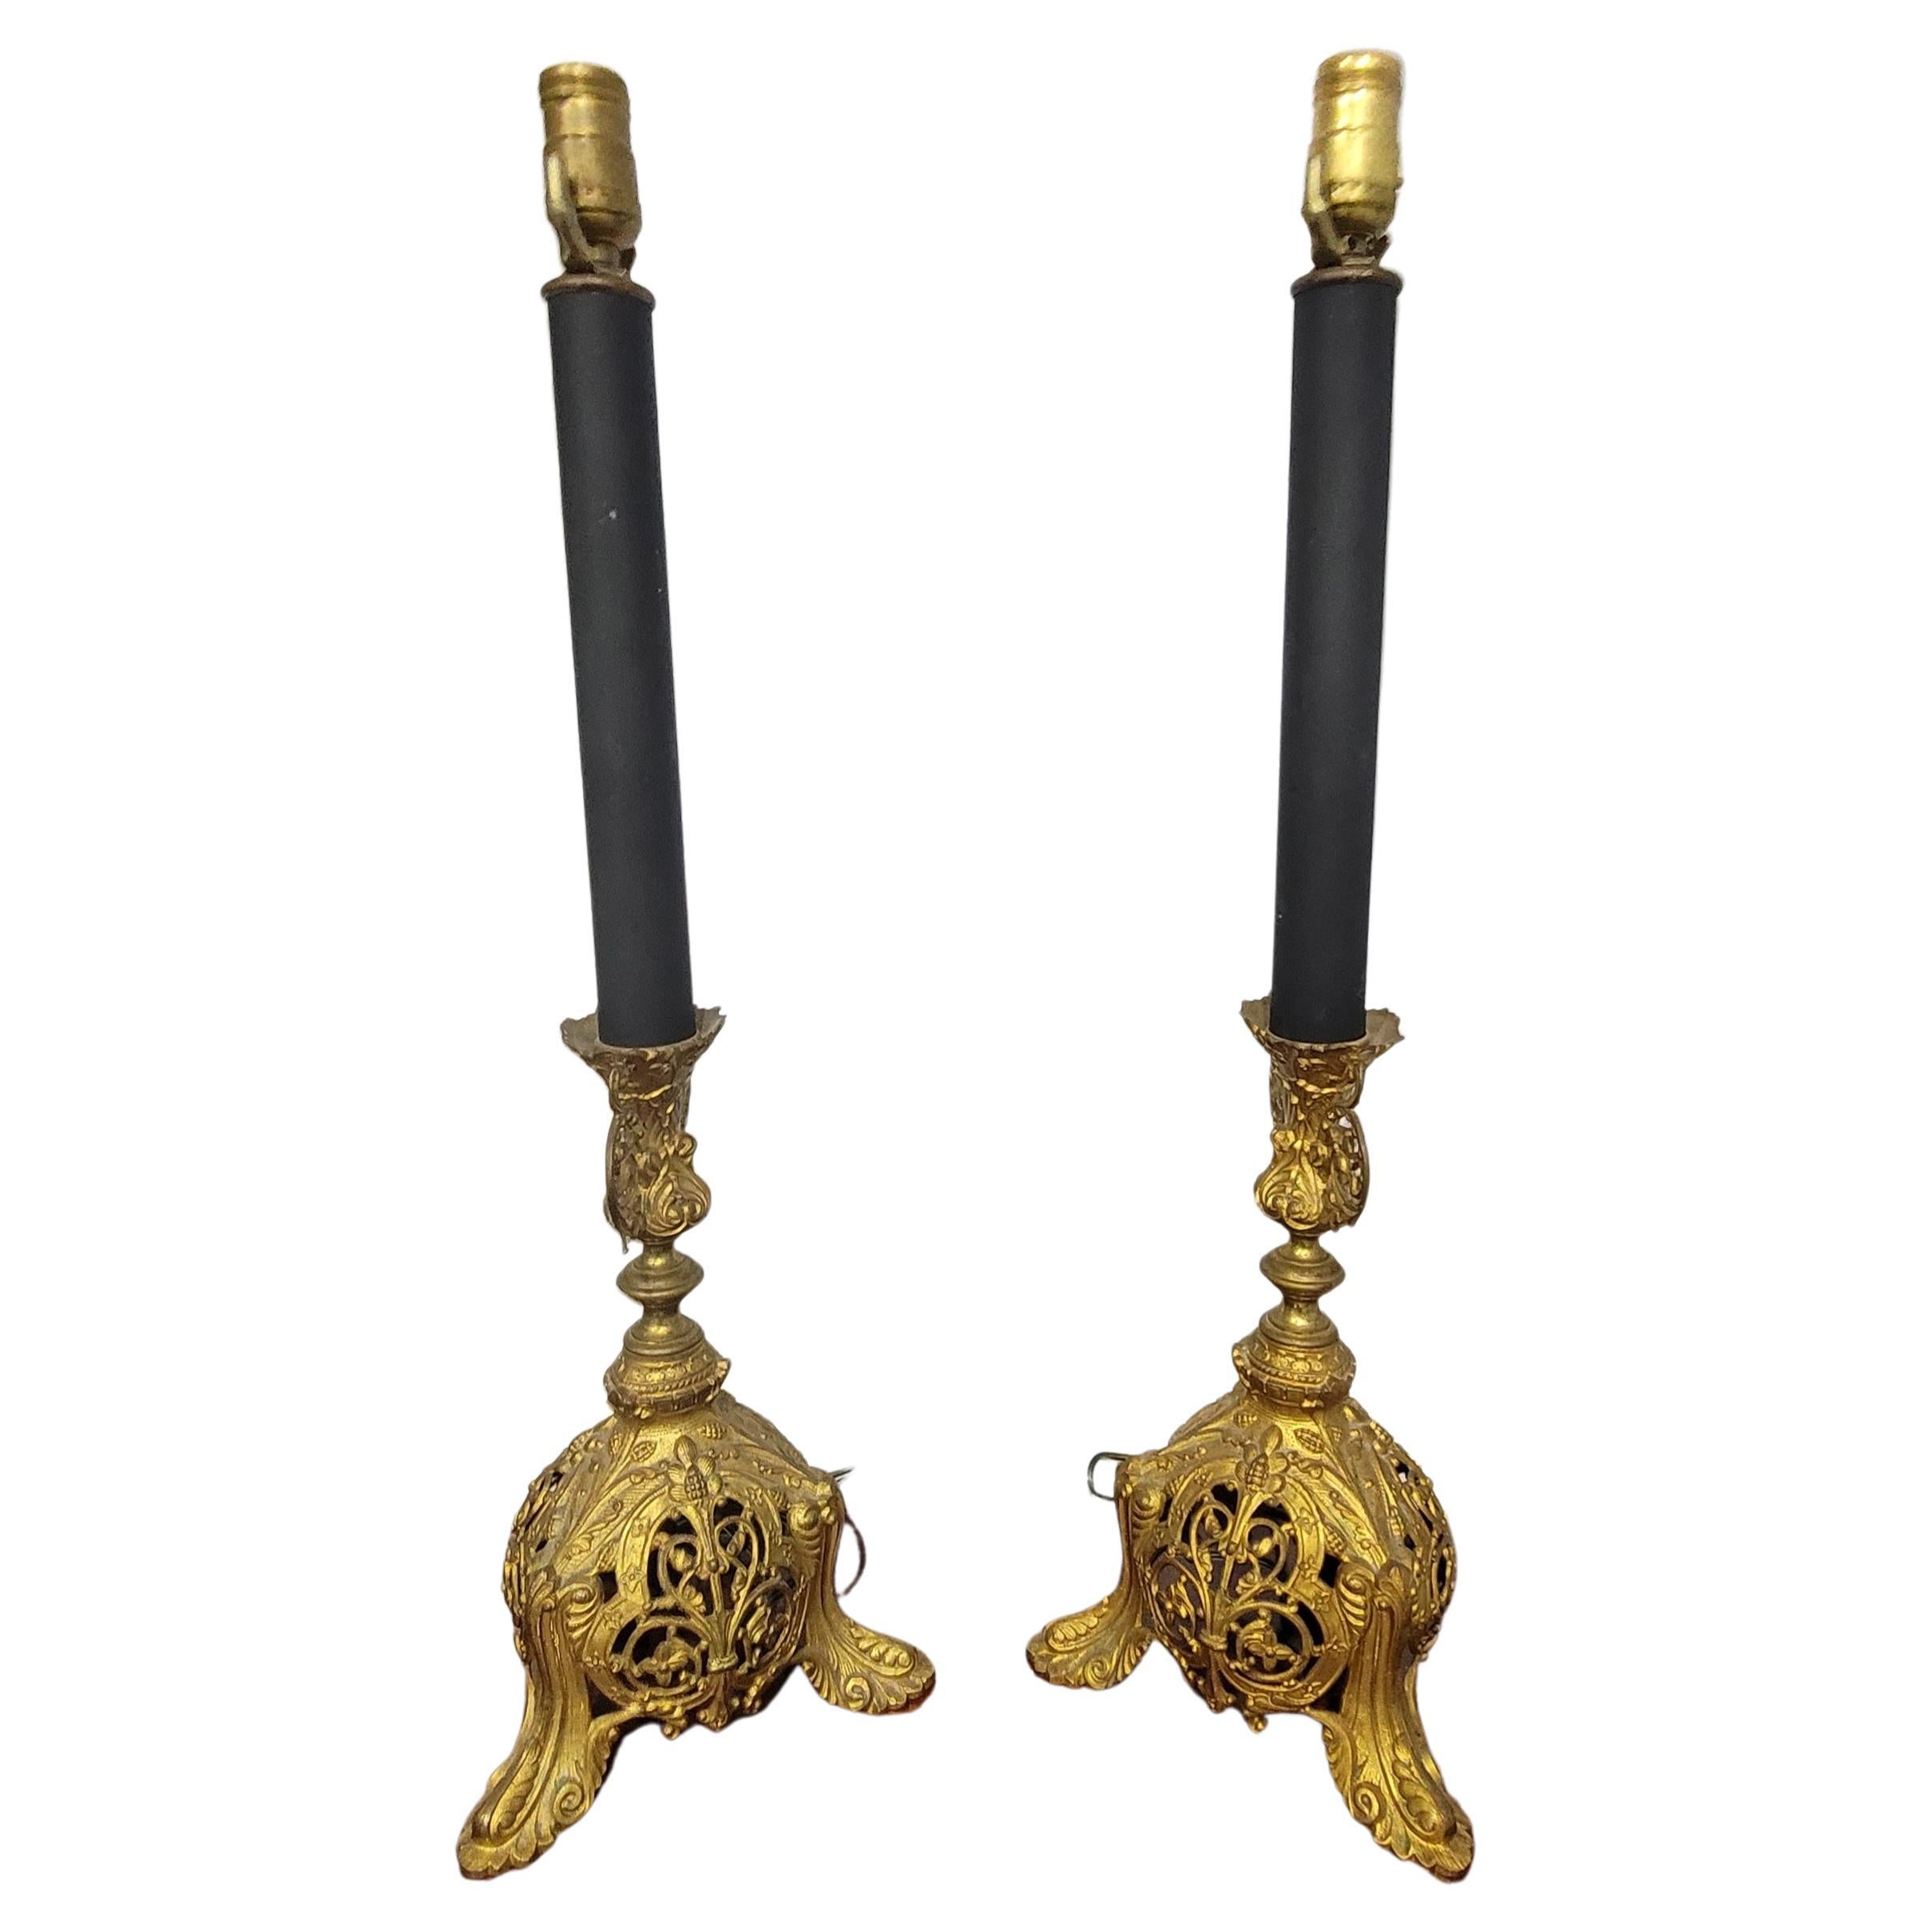 Pair of Edward F. Caldwell & Co 1851-1914 attributed renaissance revival style ormolu gilt and ebonized metal decorated table lamps, New York, early 20th century. Measure 26.25